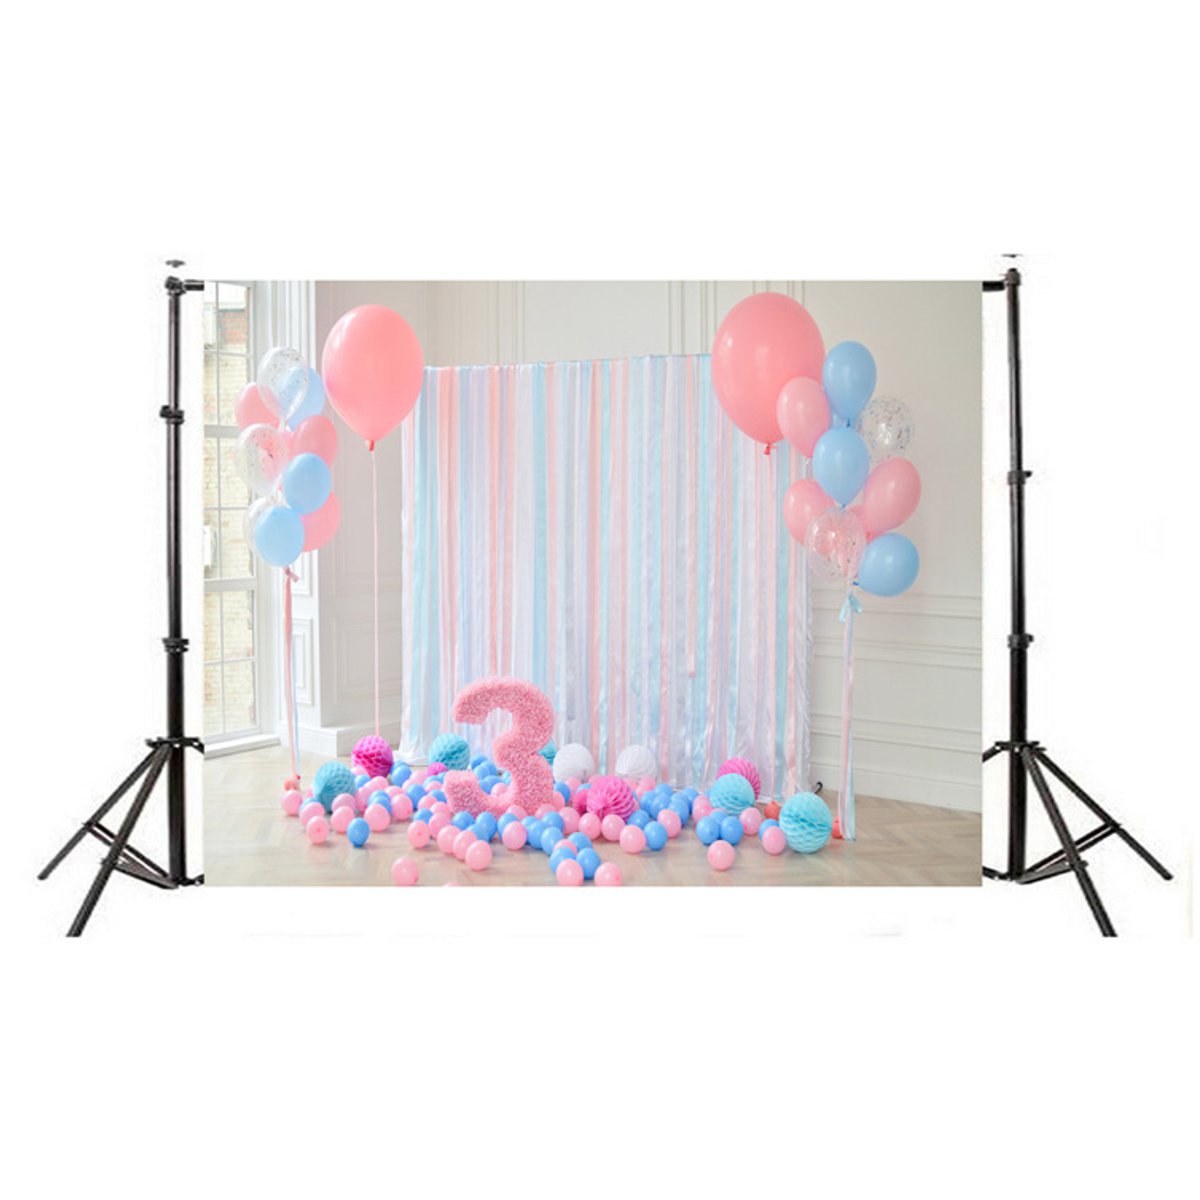 5x3FT-7x5FT-9x6FT-Vinyl-Pink-Blue-Balloon-3-Years-Old-Birthday-Photography-Backdrop-Background-Studi-1635482-1